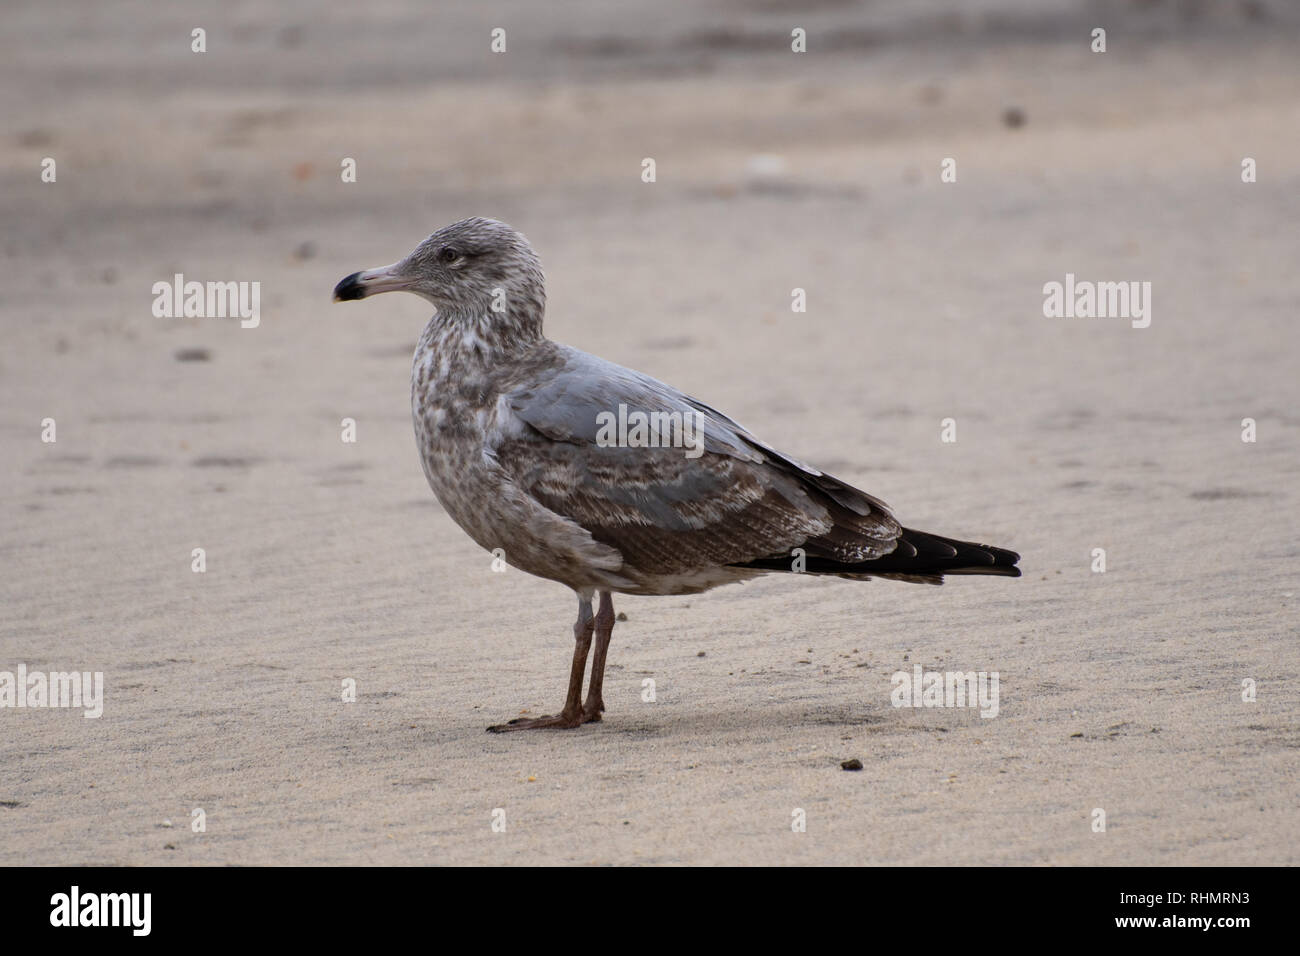 A Juvenile Ring-Billed Gull stood on the sandy beach of Long Branch New Jersey Stock Photo